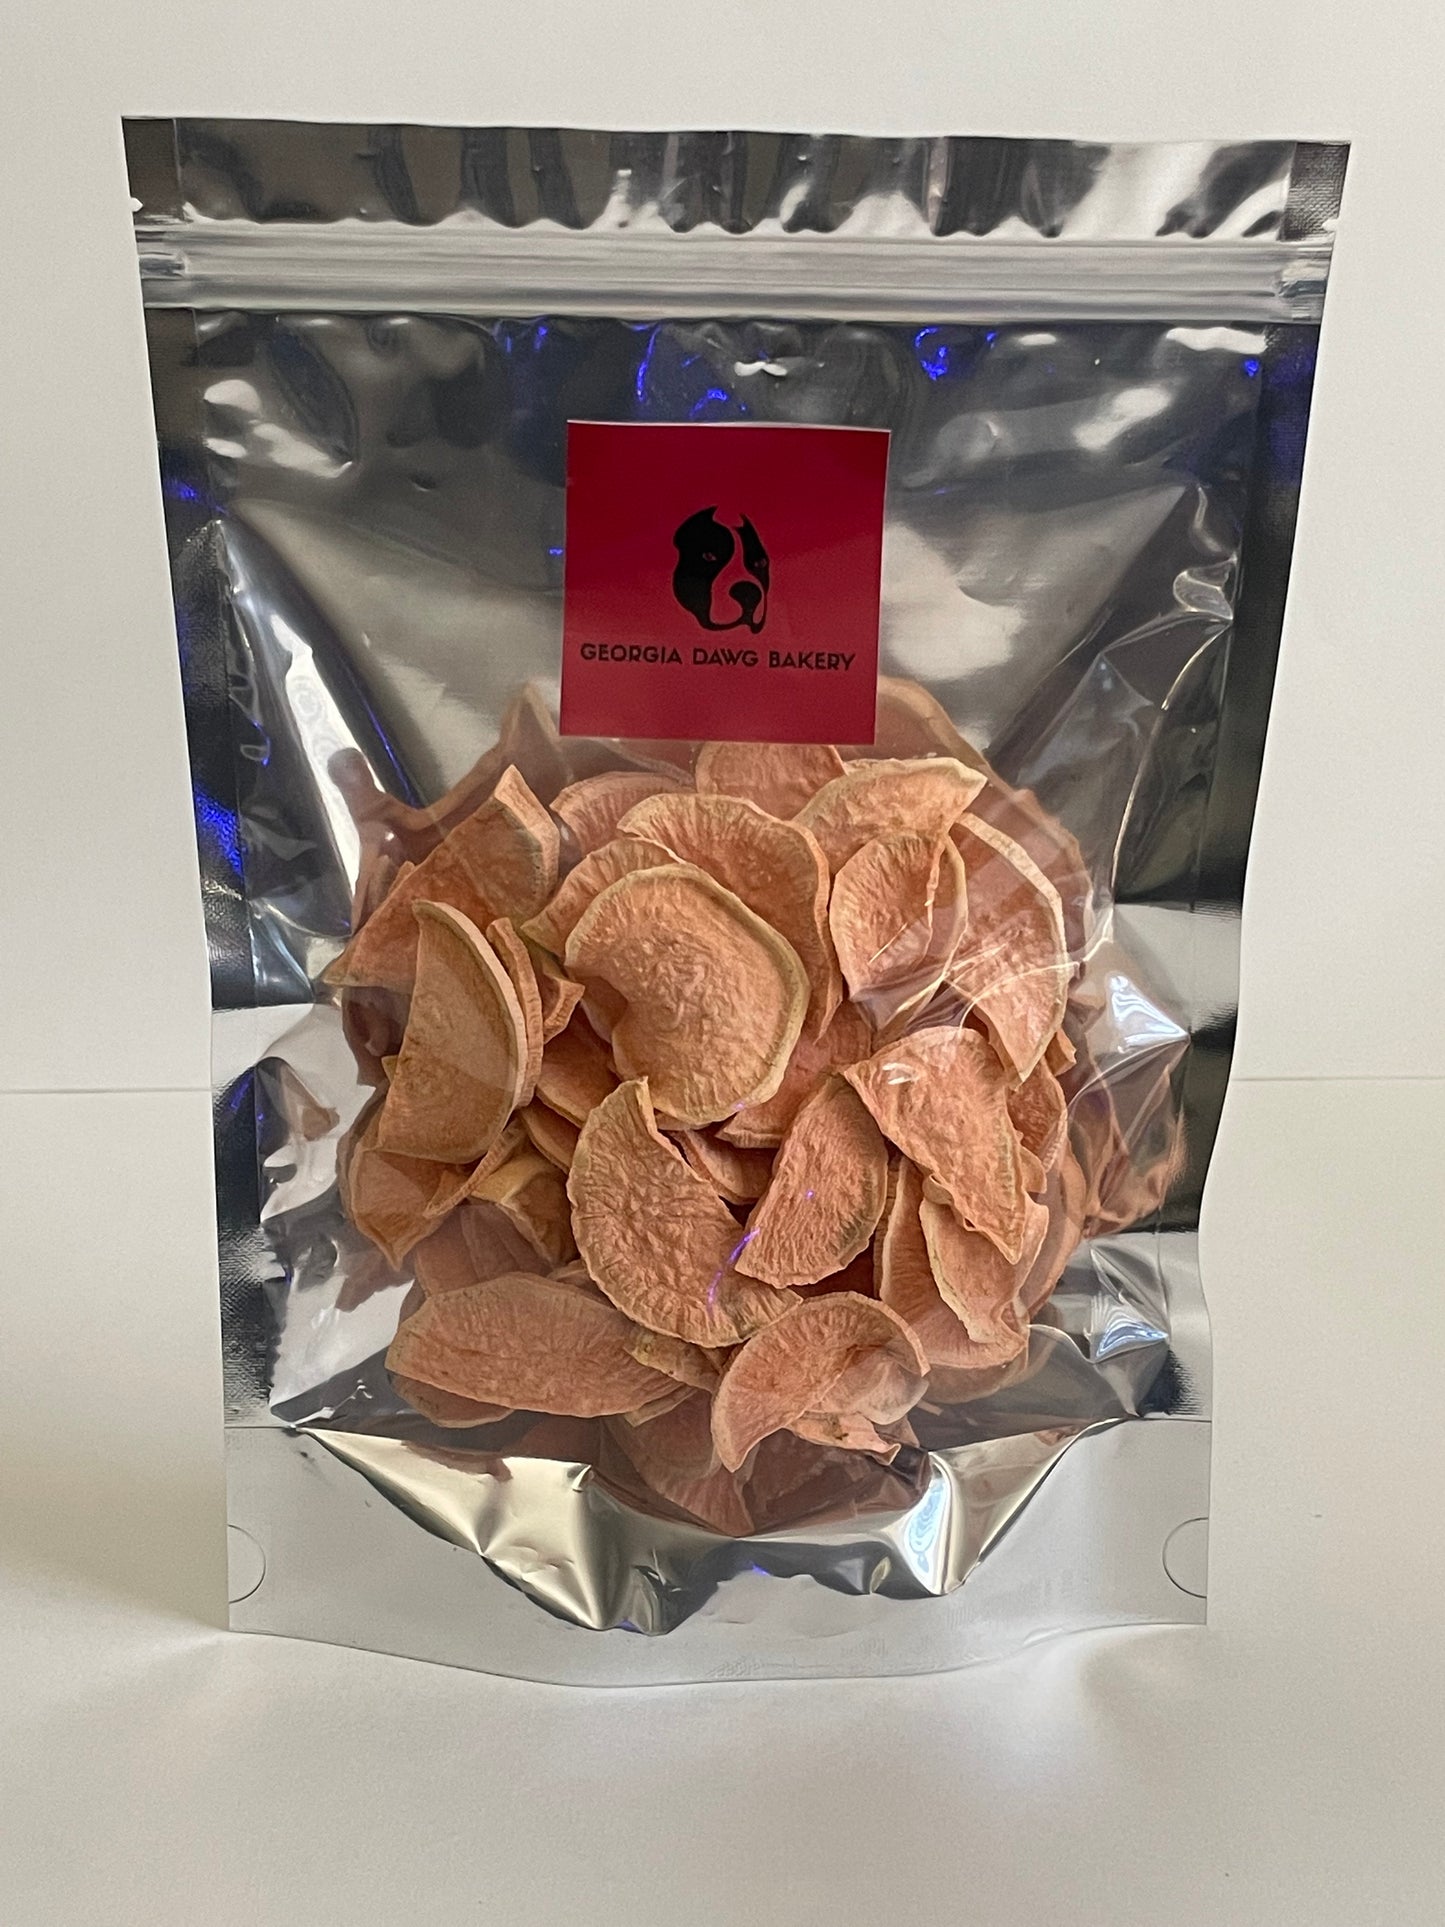 Dehydrated Sweet Potatoes For Your Pup